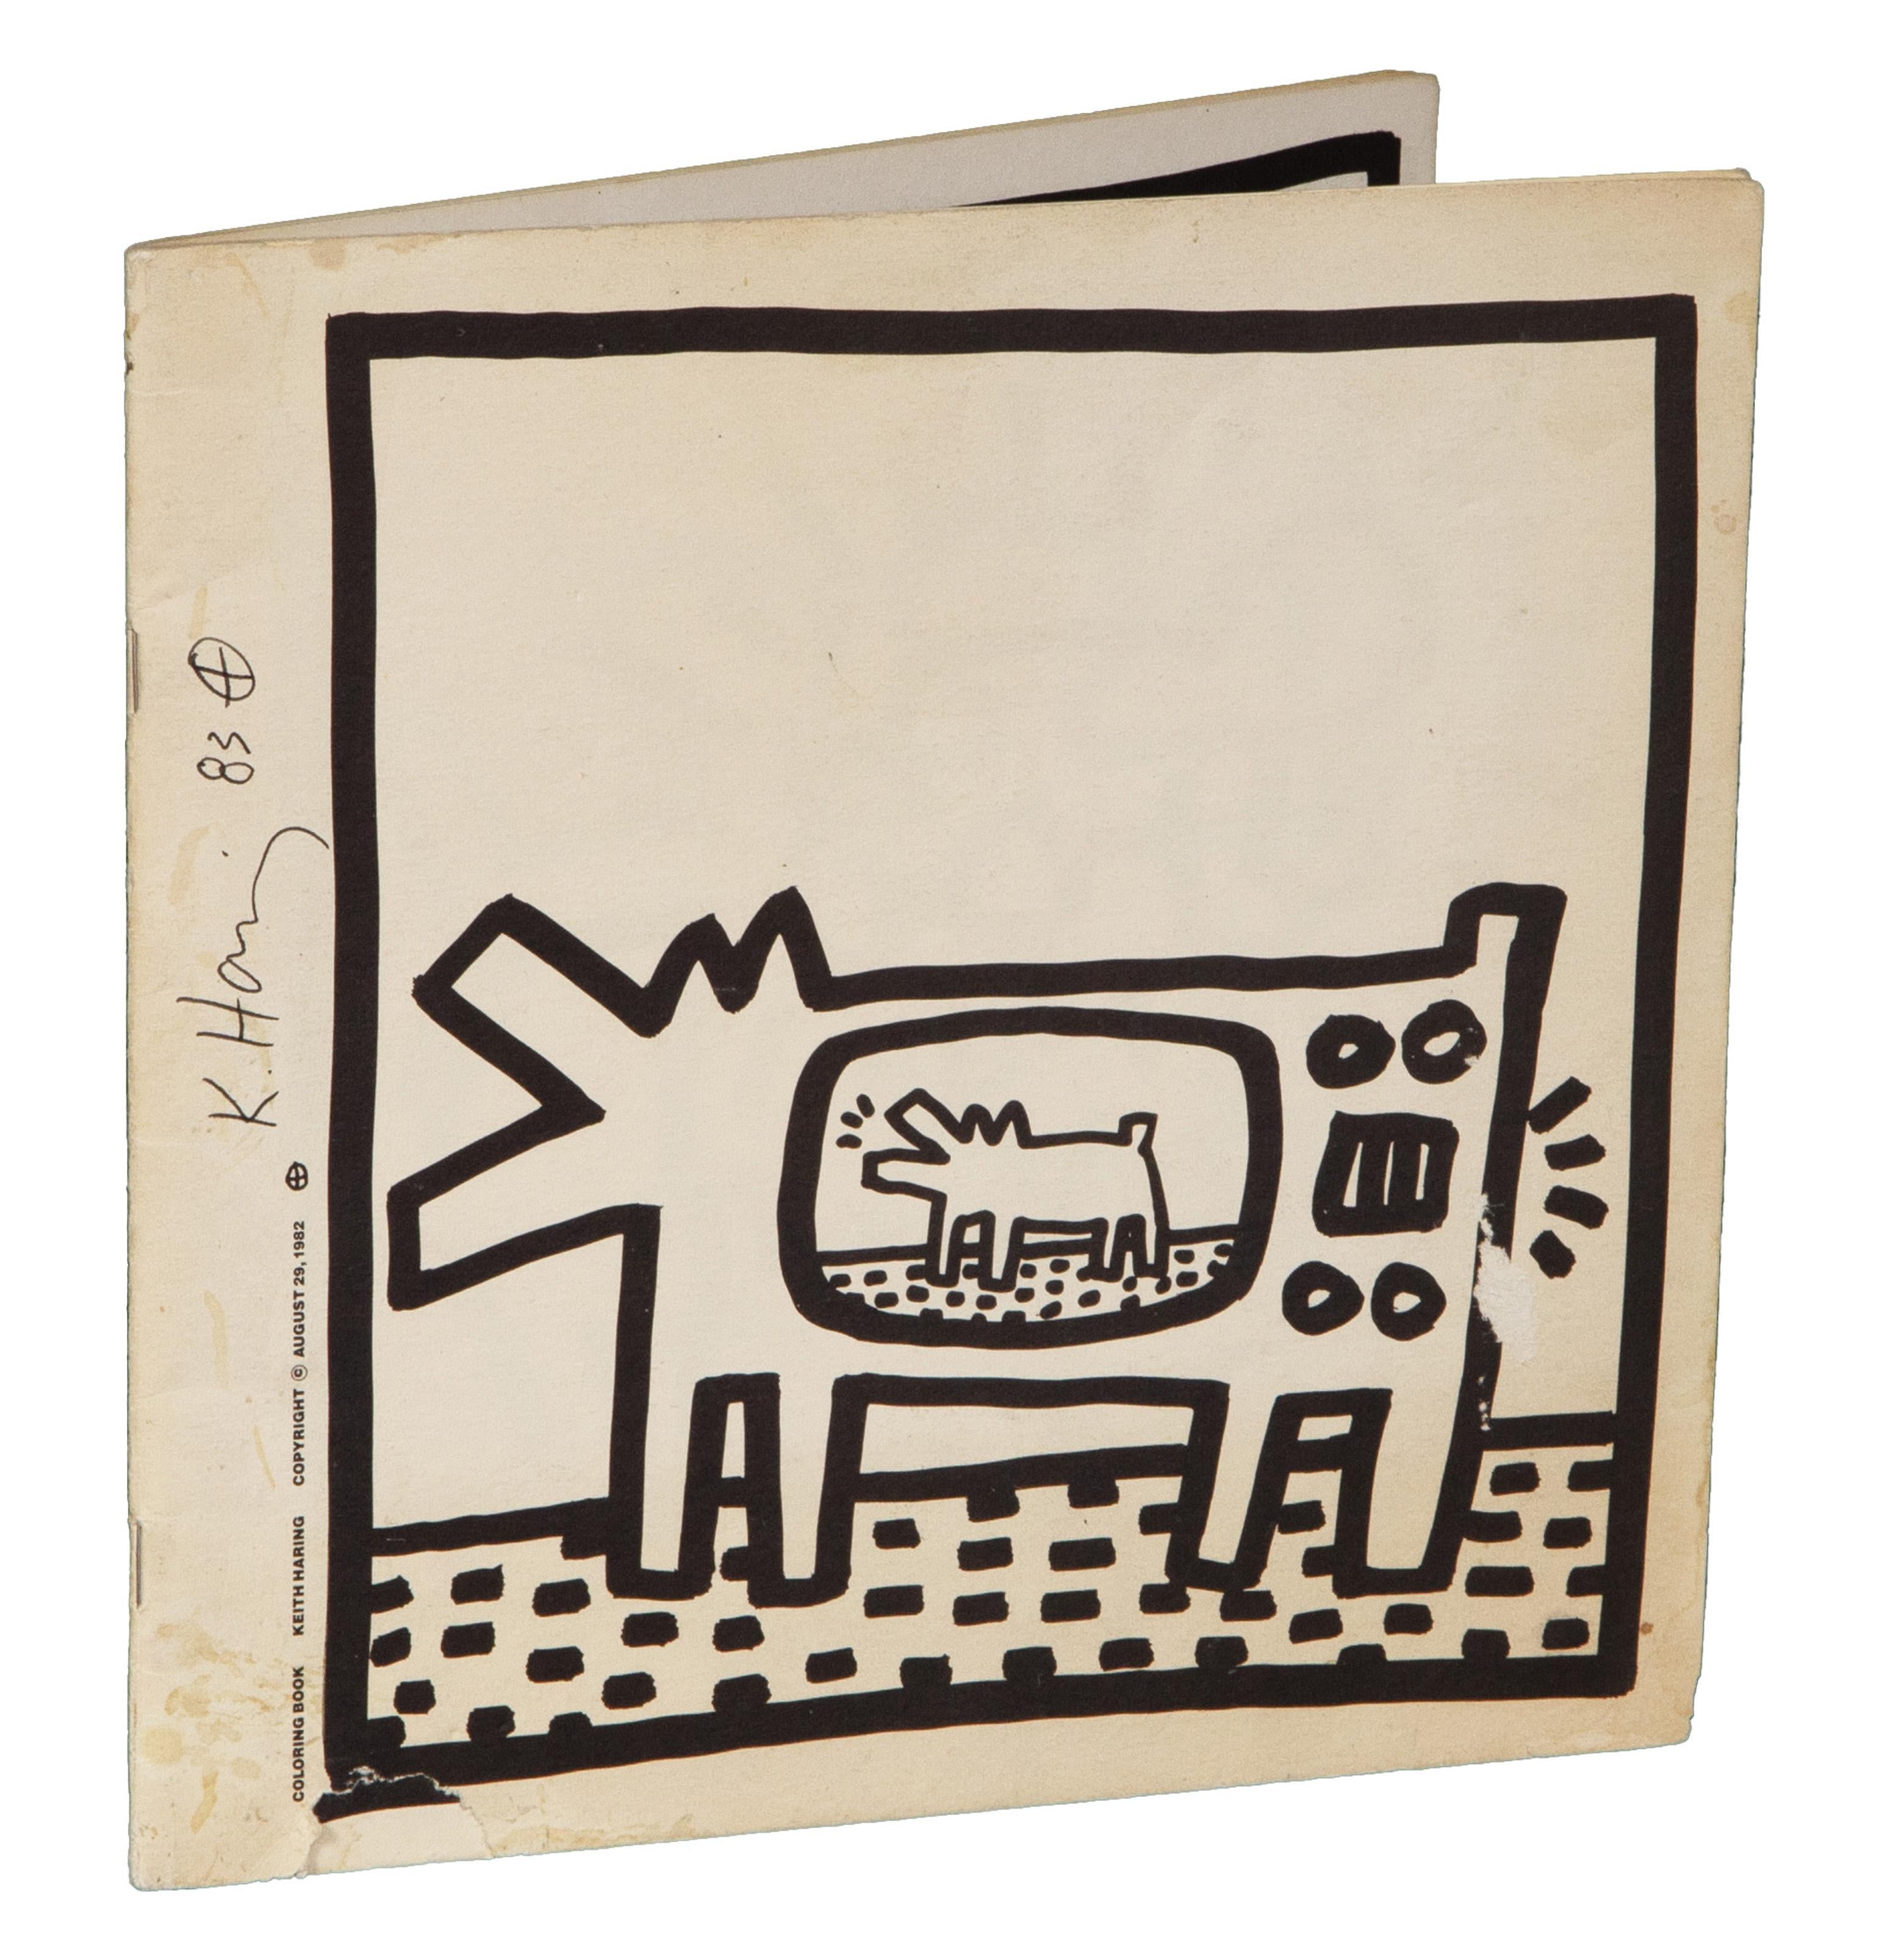 A blank coloring book designed and printed by American Pop artist Keith Haring. This copy is signed and dated in pen by the artist and features several illustrations in the artist’s classic style.

Coloring Book
Keith Haring, American